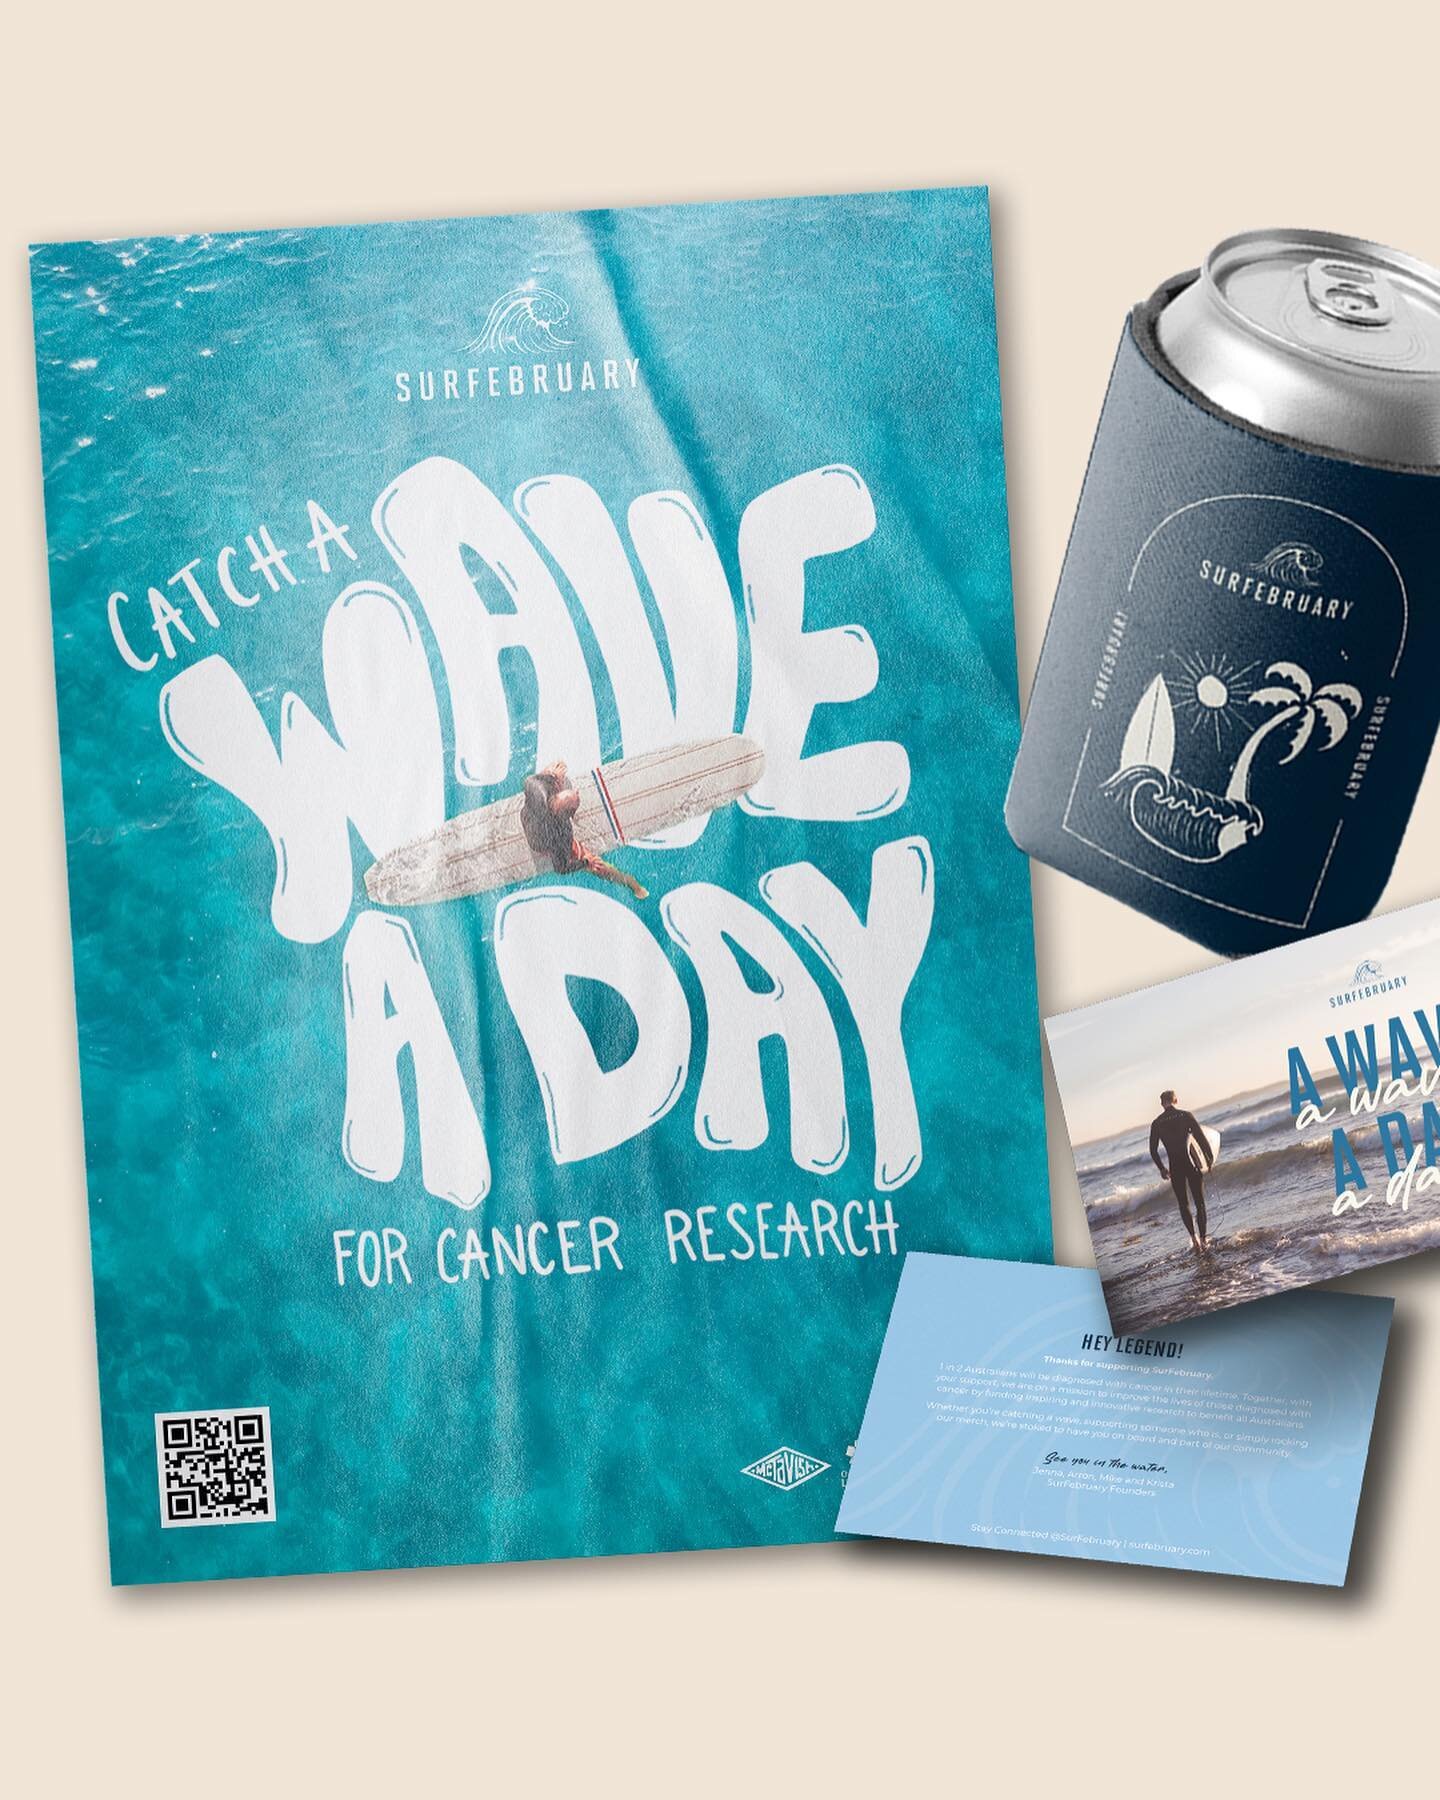 To get pumped for @surfebruary 2023 the team worked on a new look and feel for the brand/events visual identity. We took great inspiration from the surf community to create edgy, exciting and engaging designs, including posters, edms, social media po